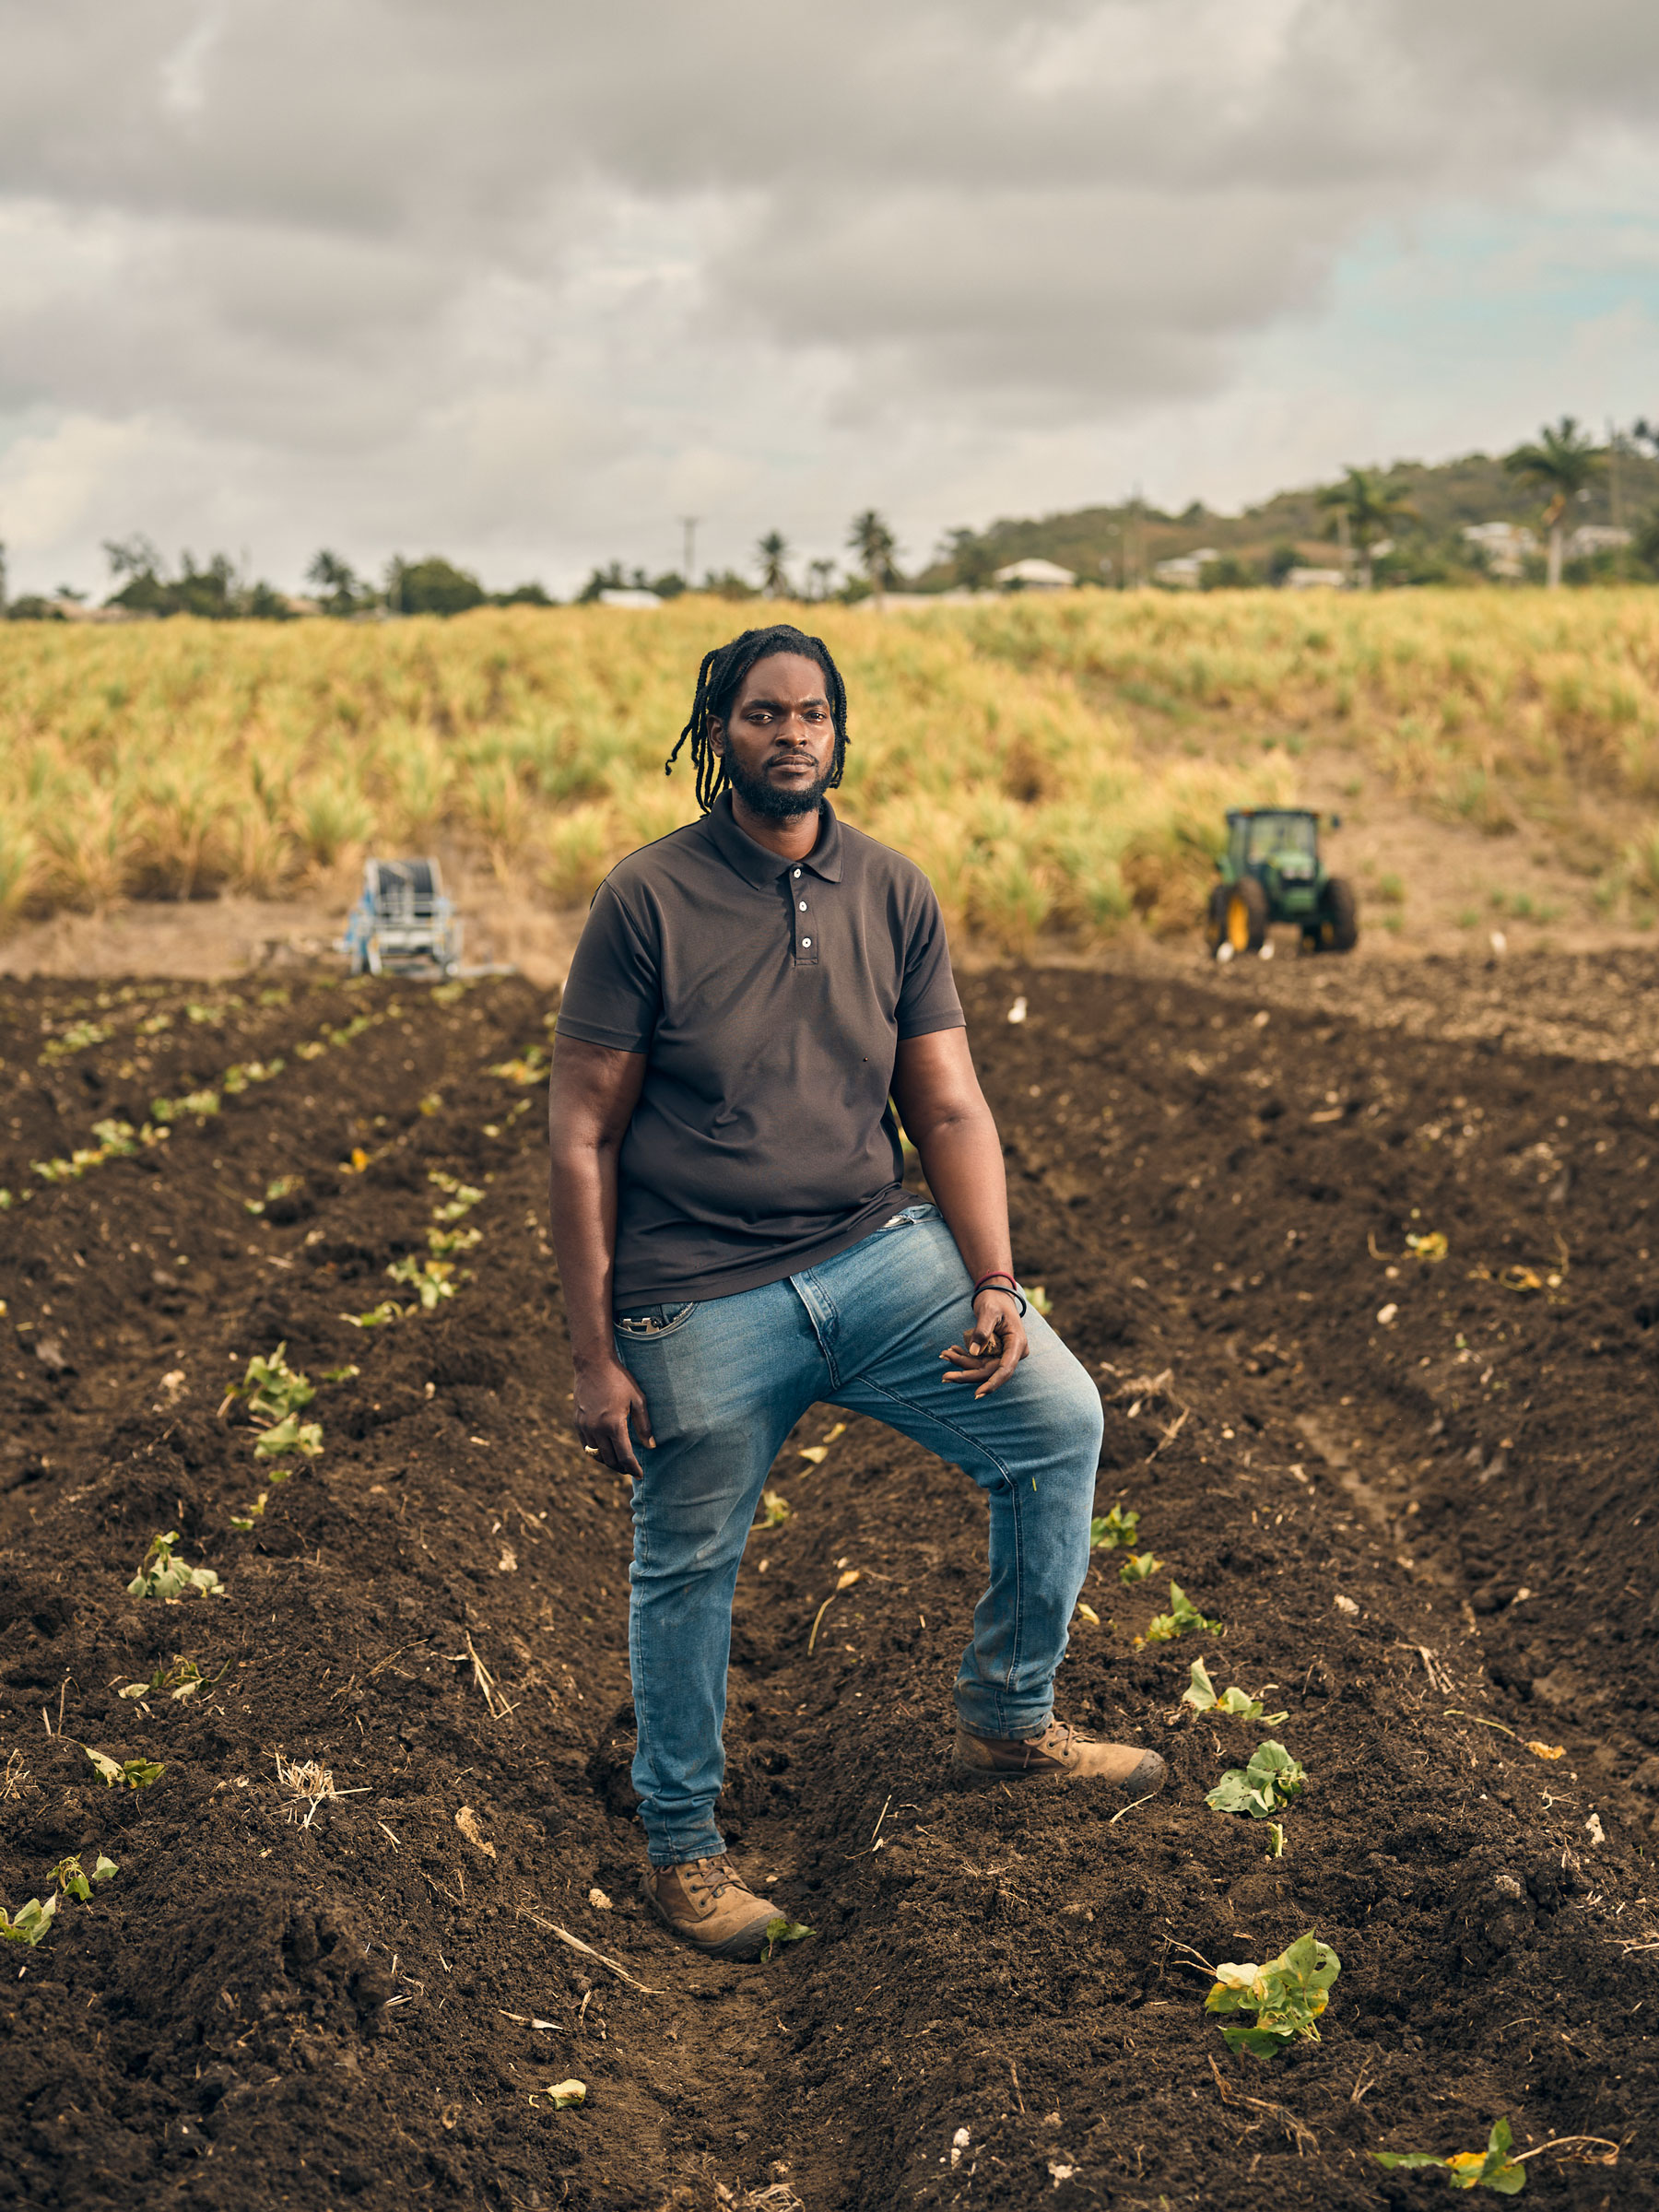 Farm manager standing between a row of crops in Barbados